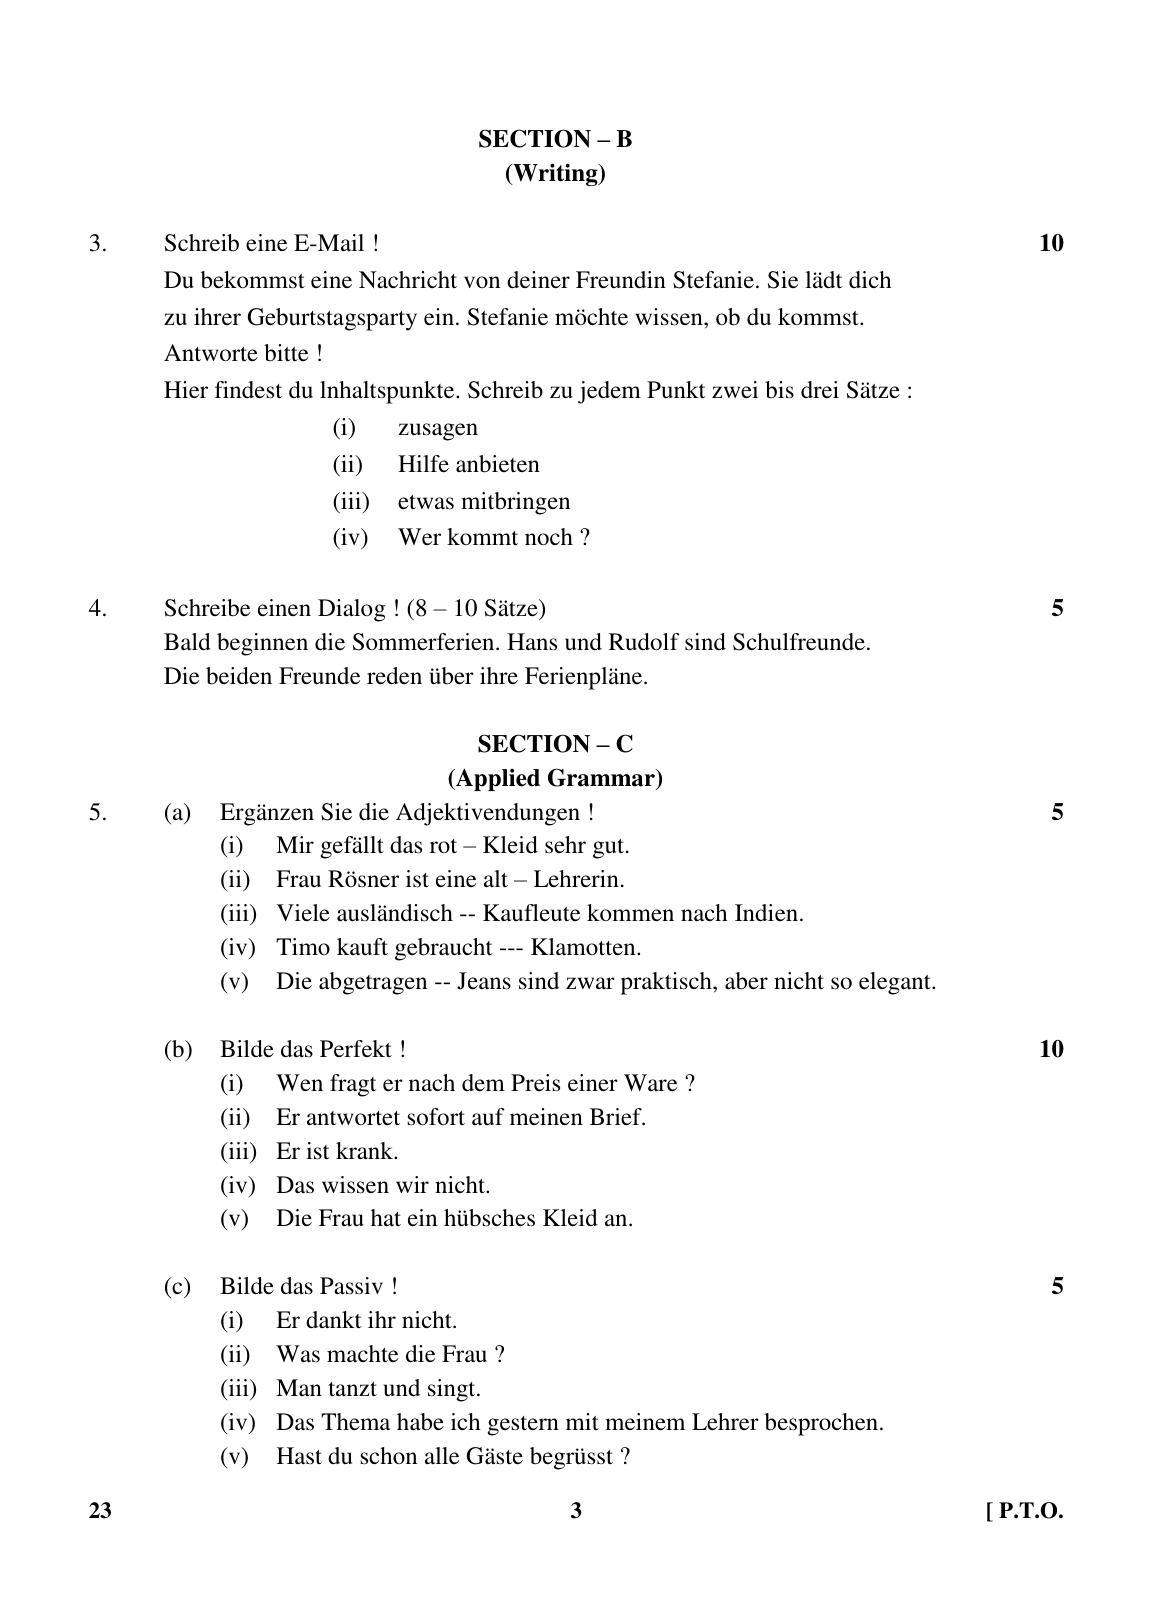 CBSE Class 10 23 (German) 2018 Question Paper - Page 3